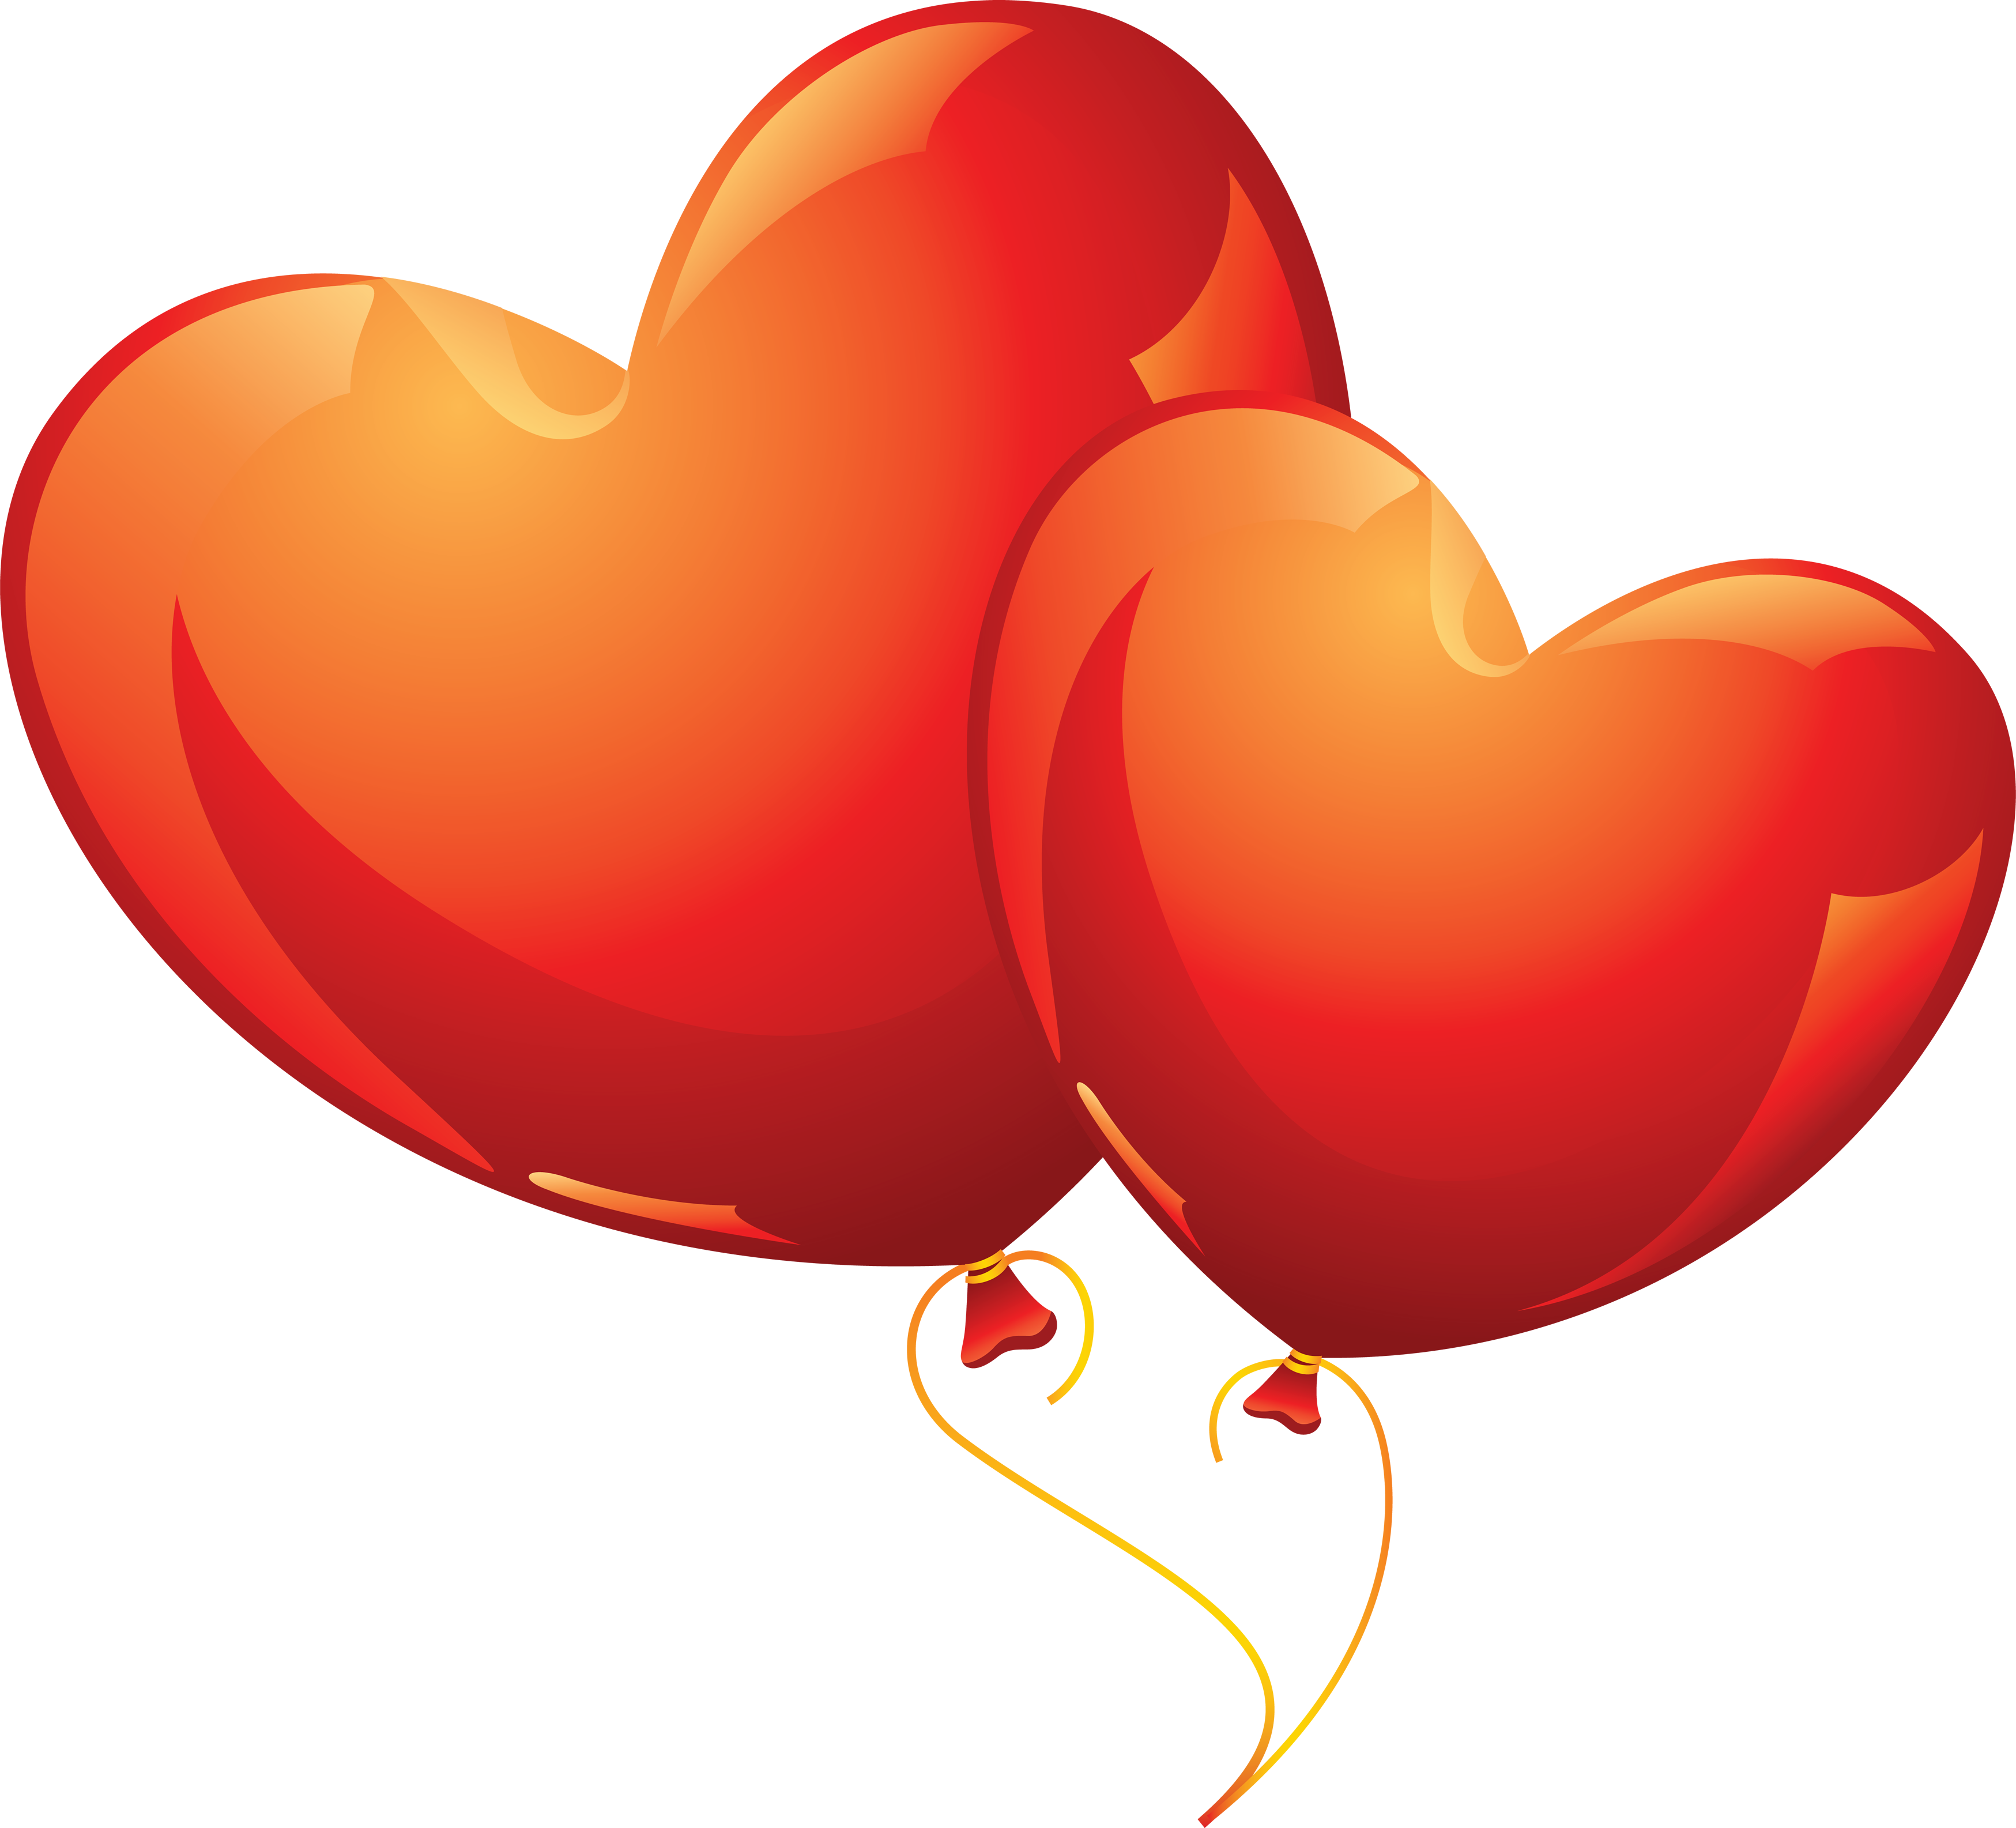 Balloon PNG images, free picture download with transparency.